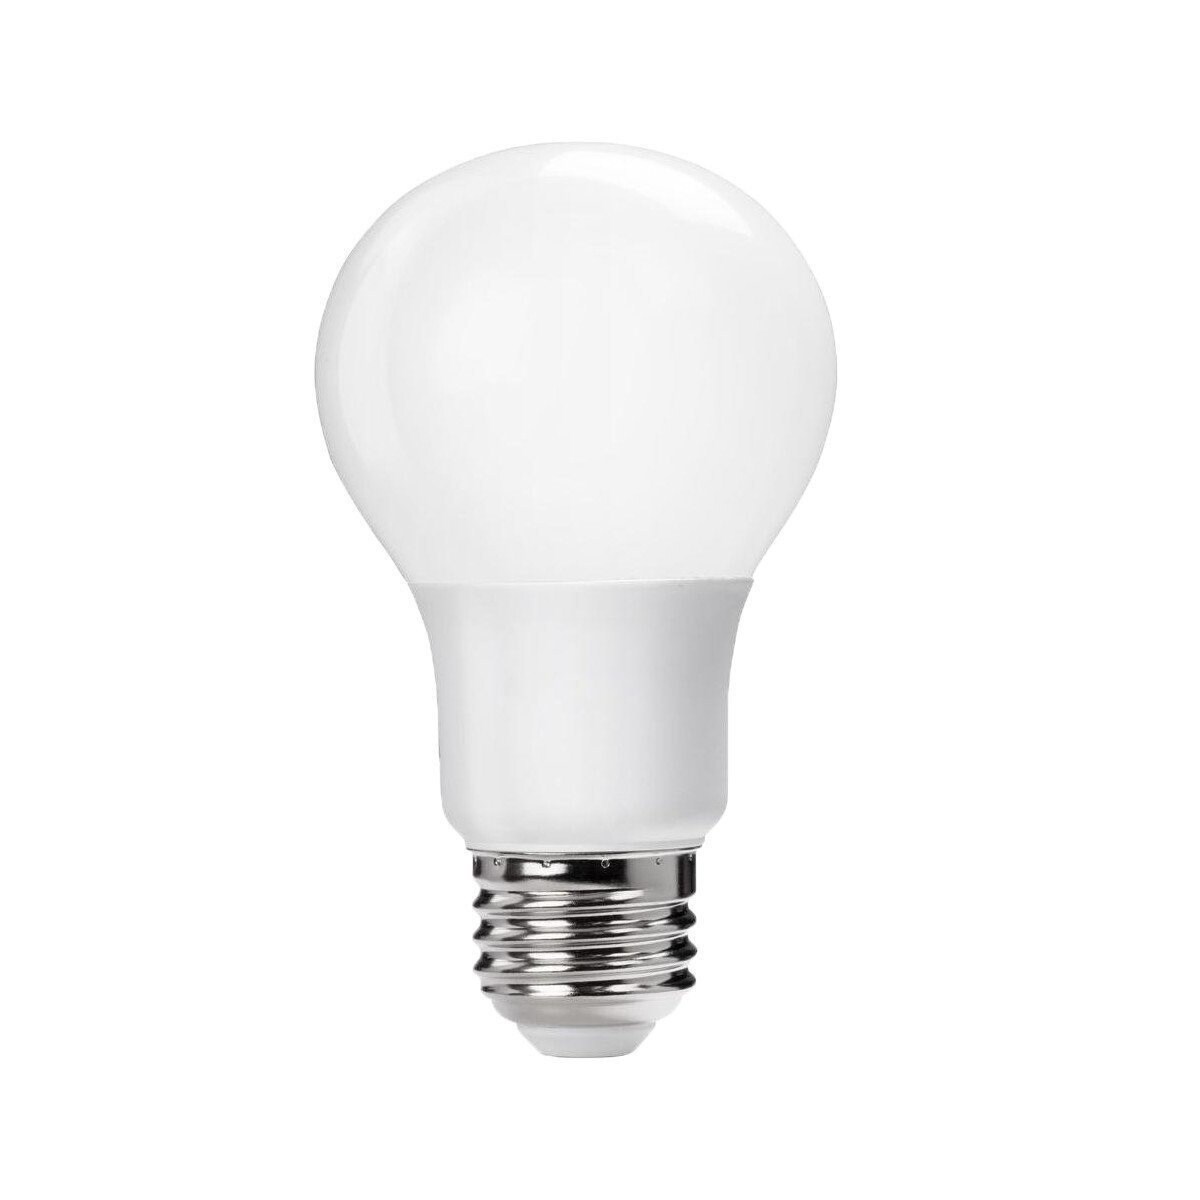 830 Lumens UL Listed 6 Pack Efficient 9W A19 LED Light Bulbs 60W Equivalent